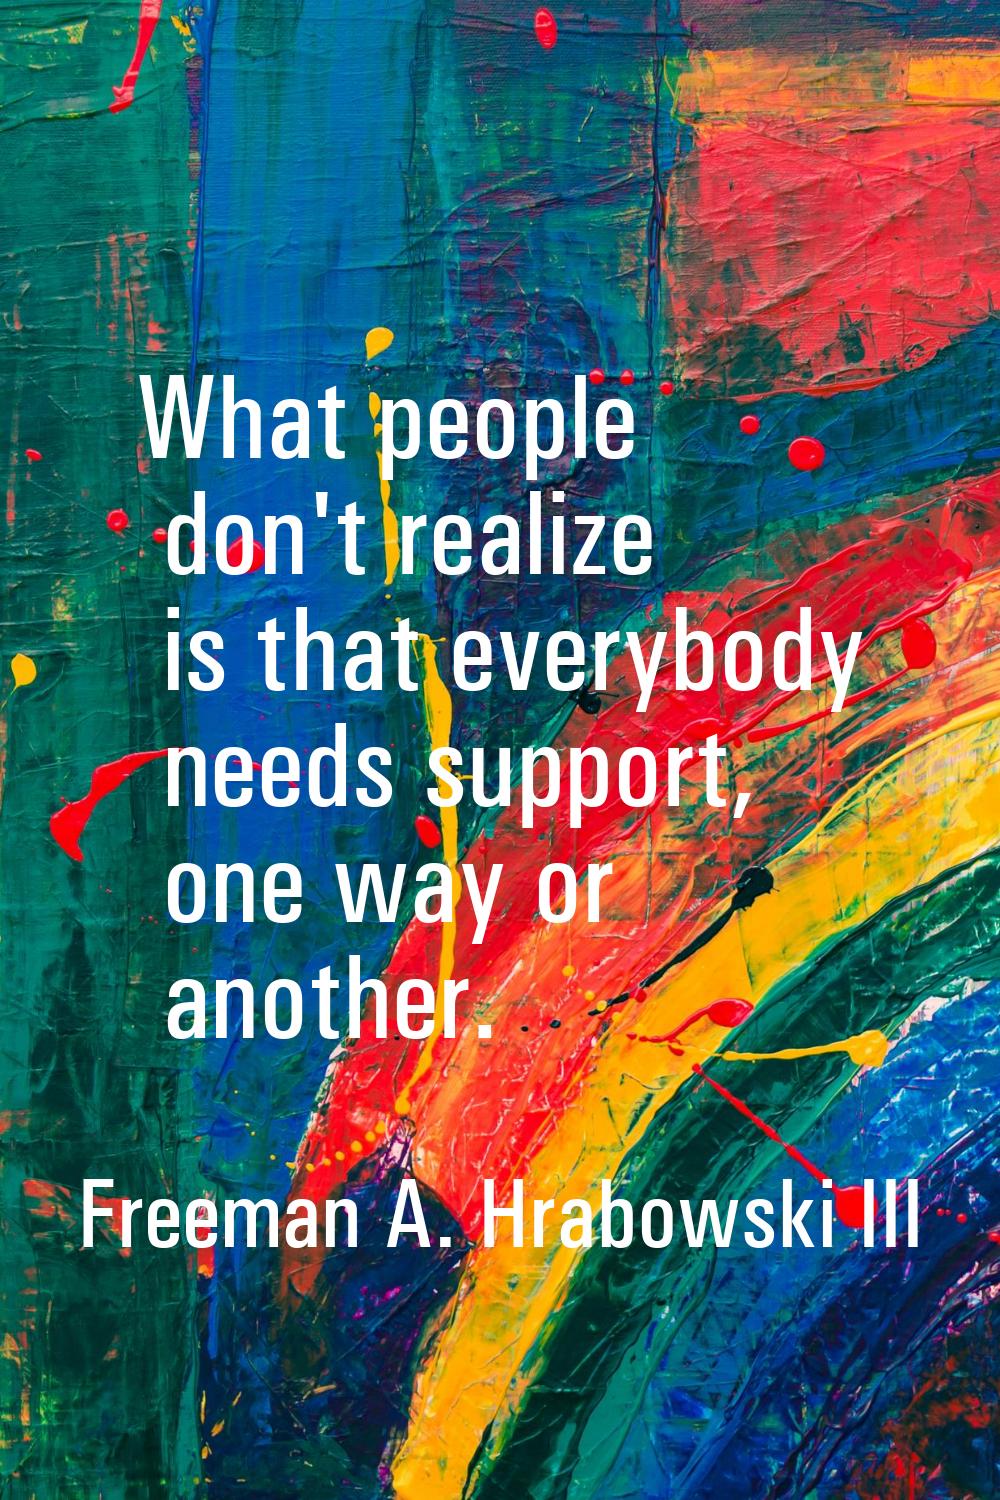 What people don't realize is that everybody needs support, one way or another.